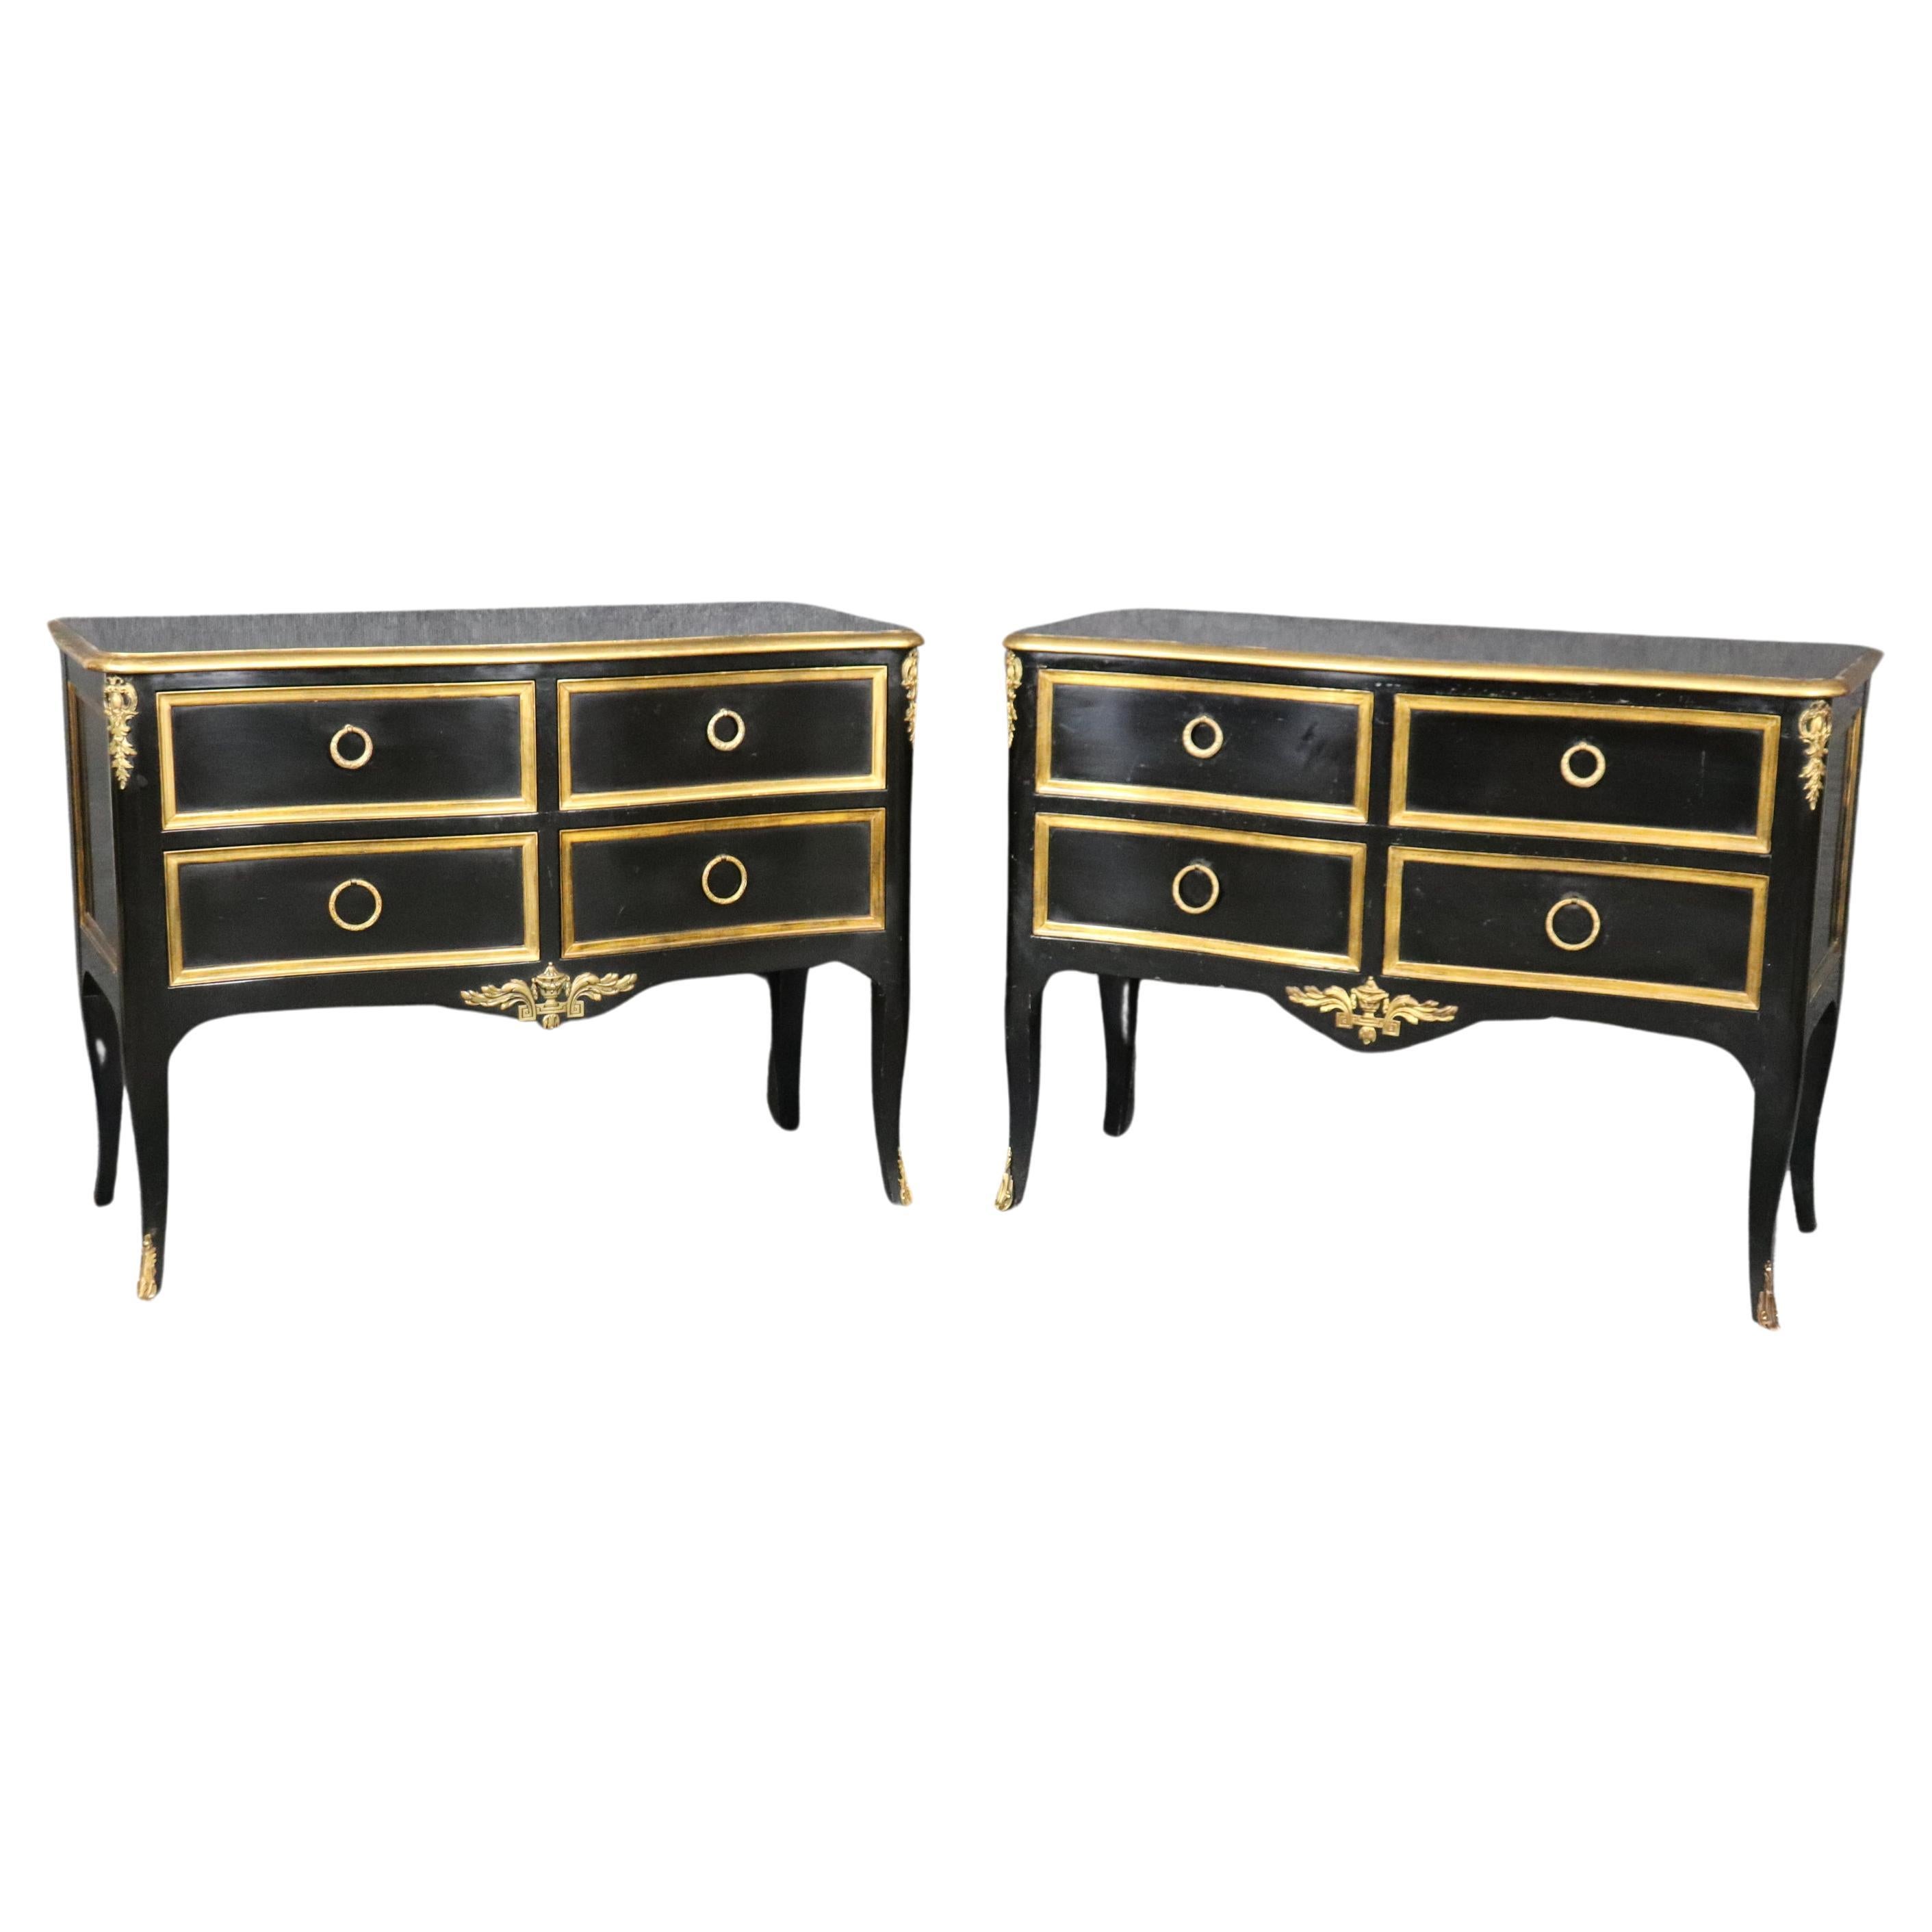 Matched Pair of Maison Jansen style Ebonized and Gilded Louis XV Commodes For Sale